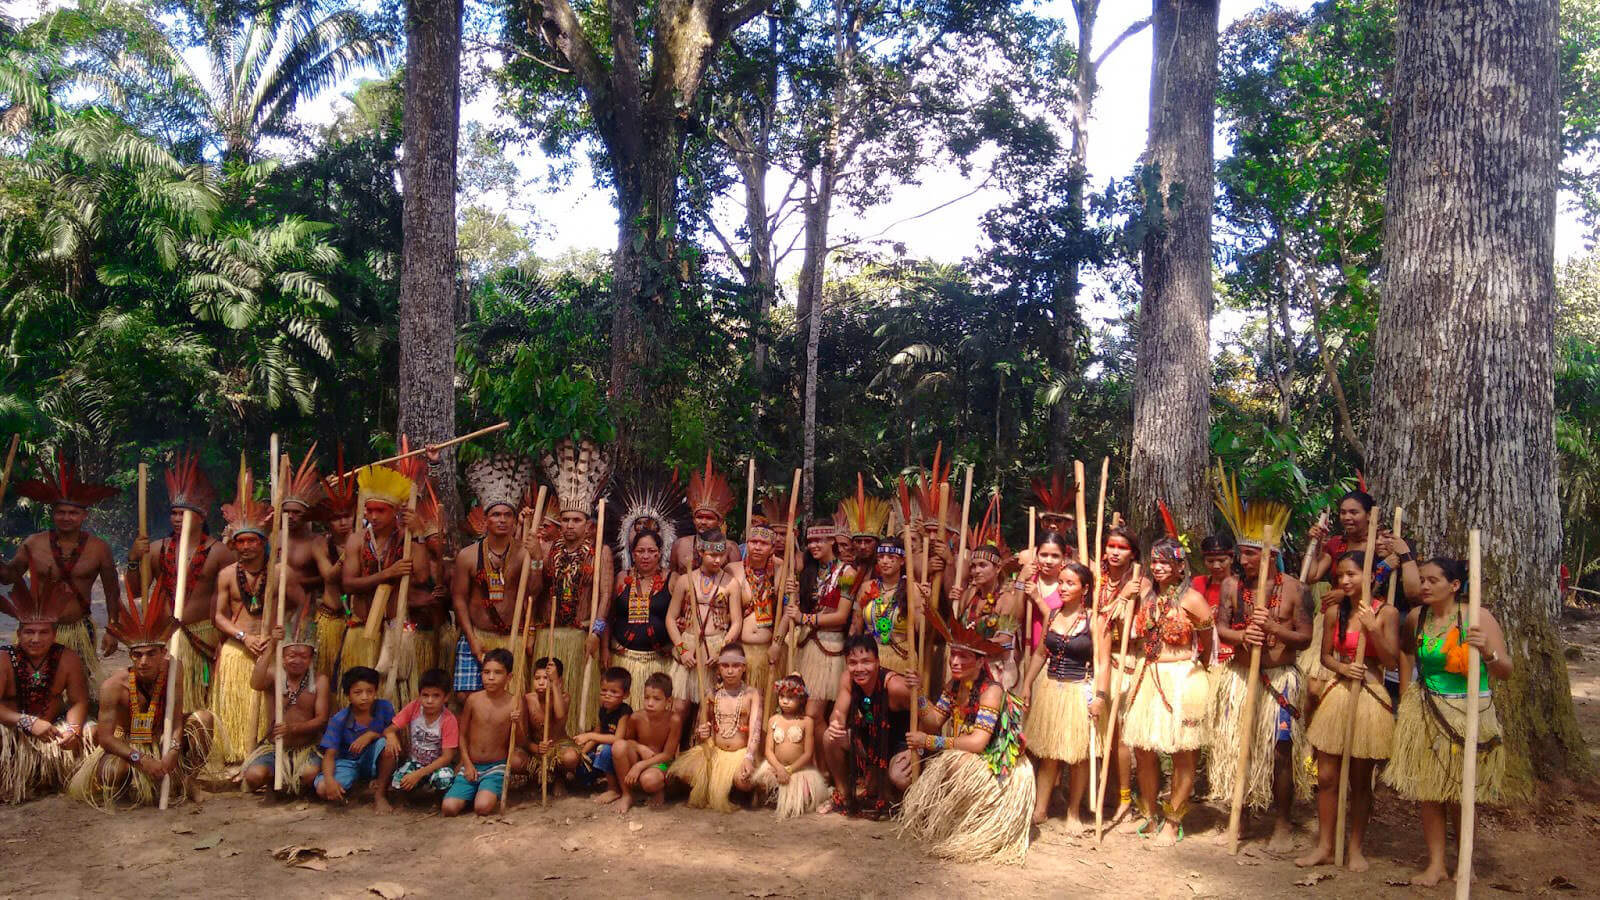 2 grand journeys to meet the indigenous peoples of the Amazon rainforest in June and July 2019